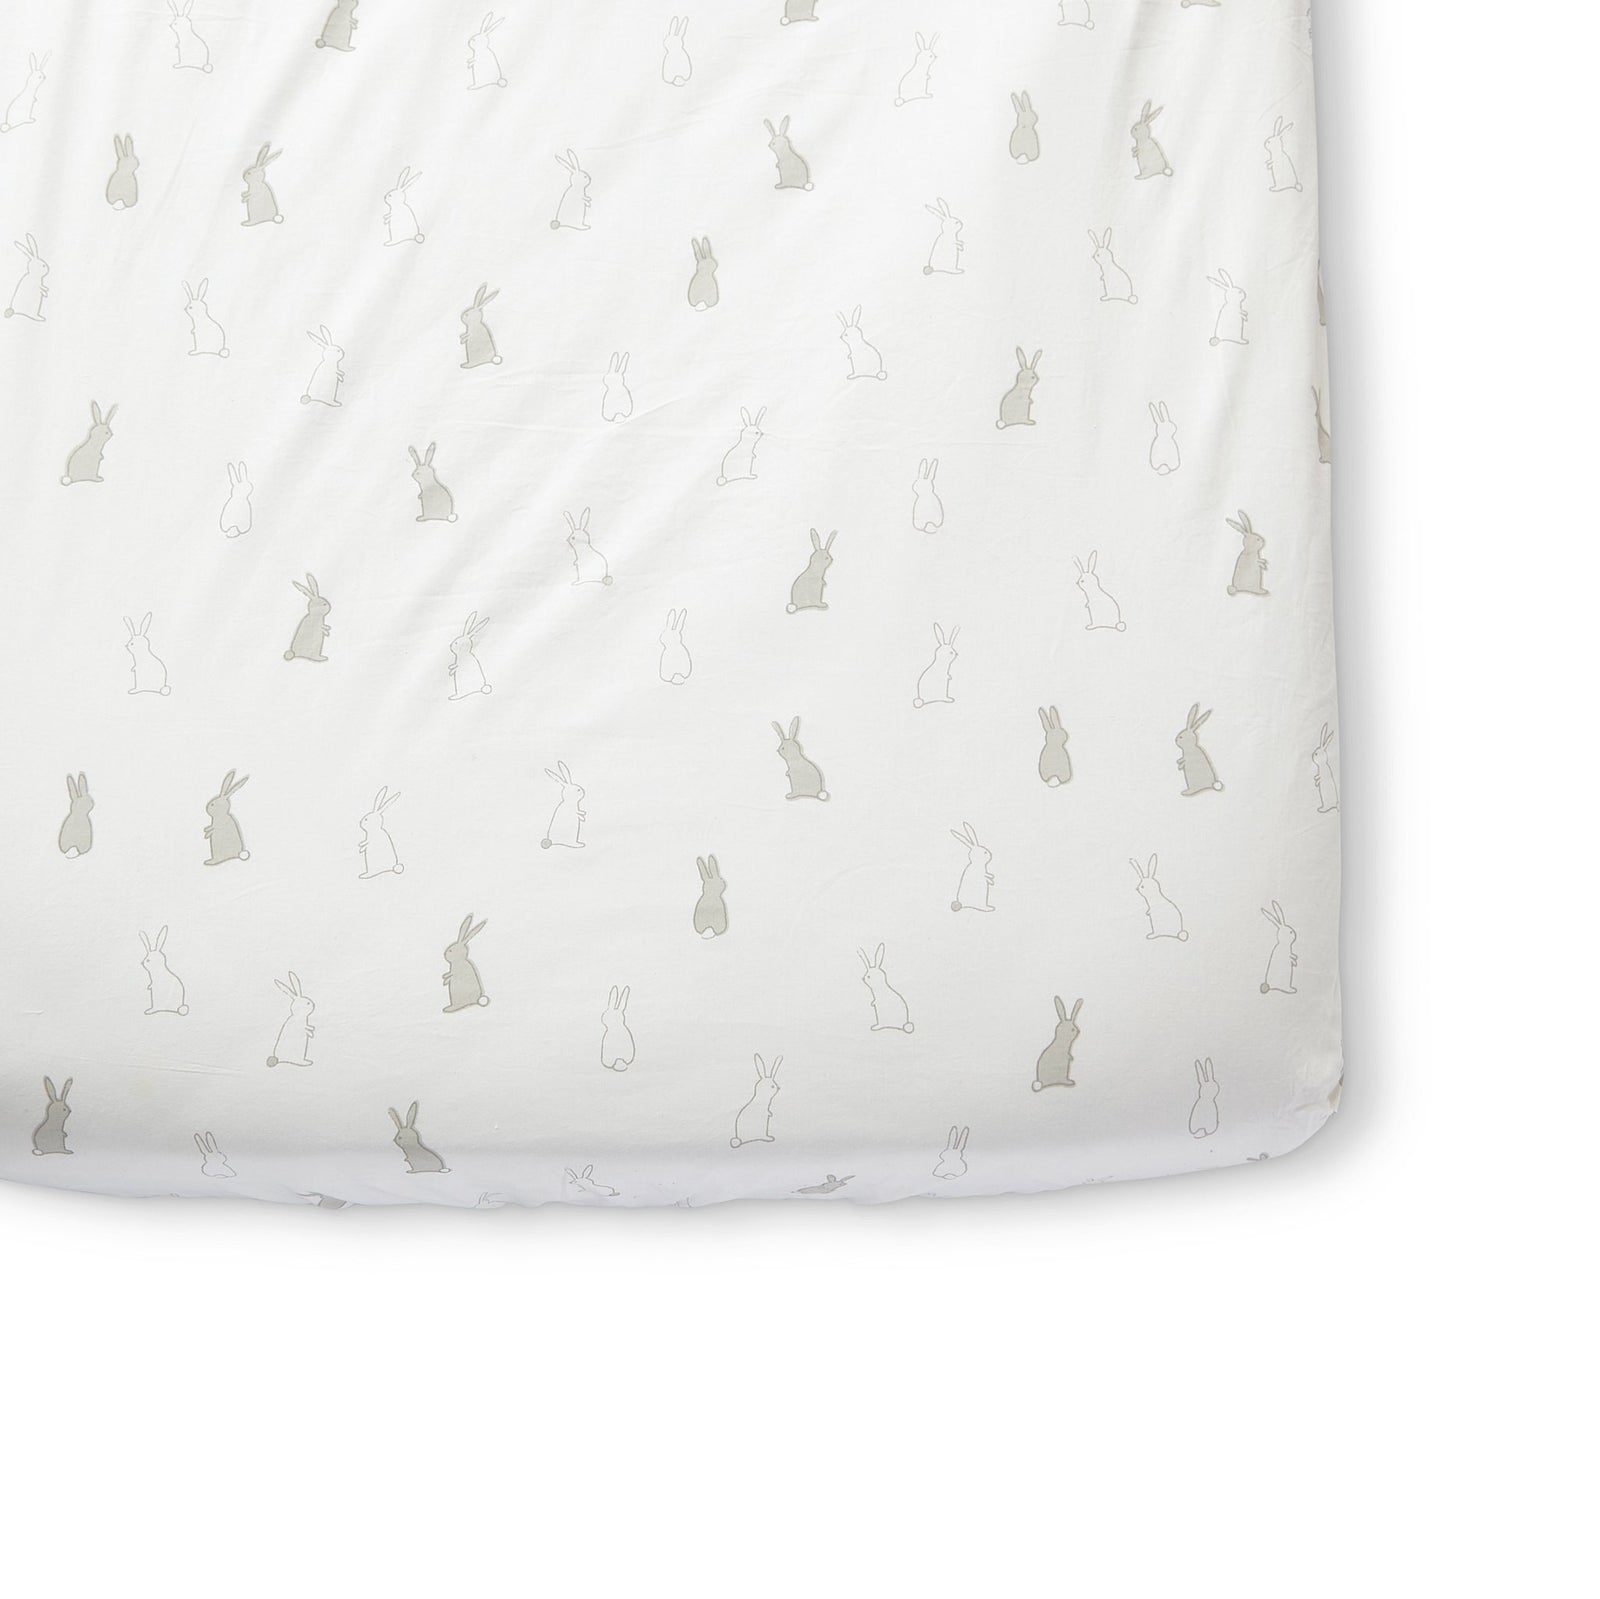 Pehr Bunny Hop Organic Crib Sheet. GOTS Certified Organic Cotton. Screen printed by hand using AZO-Free dyes. White with bunnies.